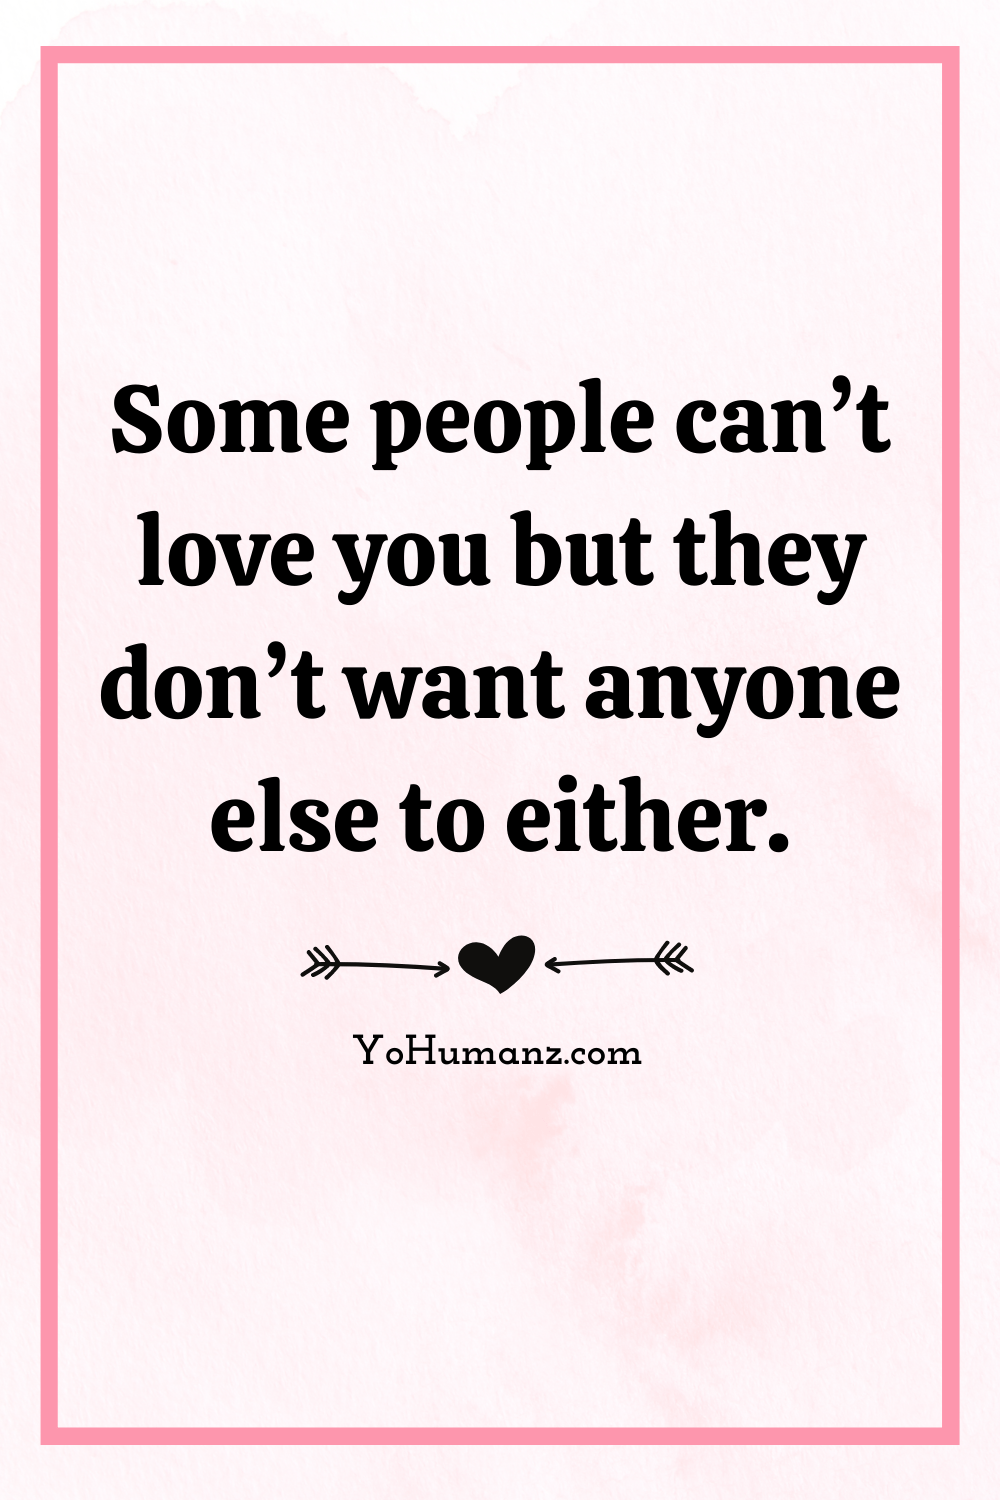 Toxic Relationship Quotes for Him and her narcissist quotes 